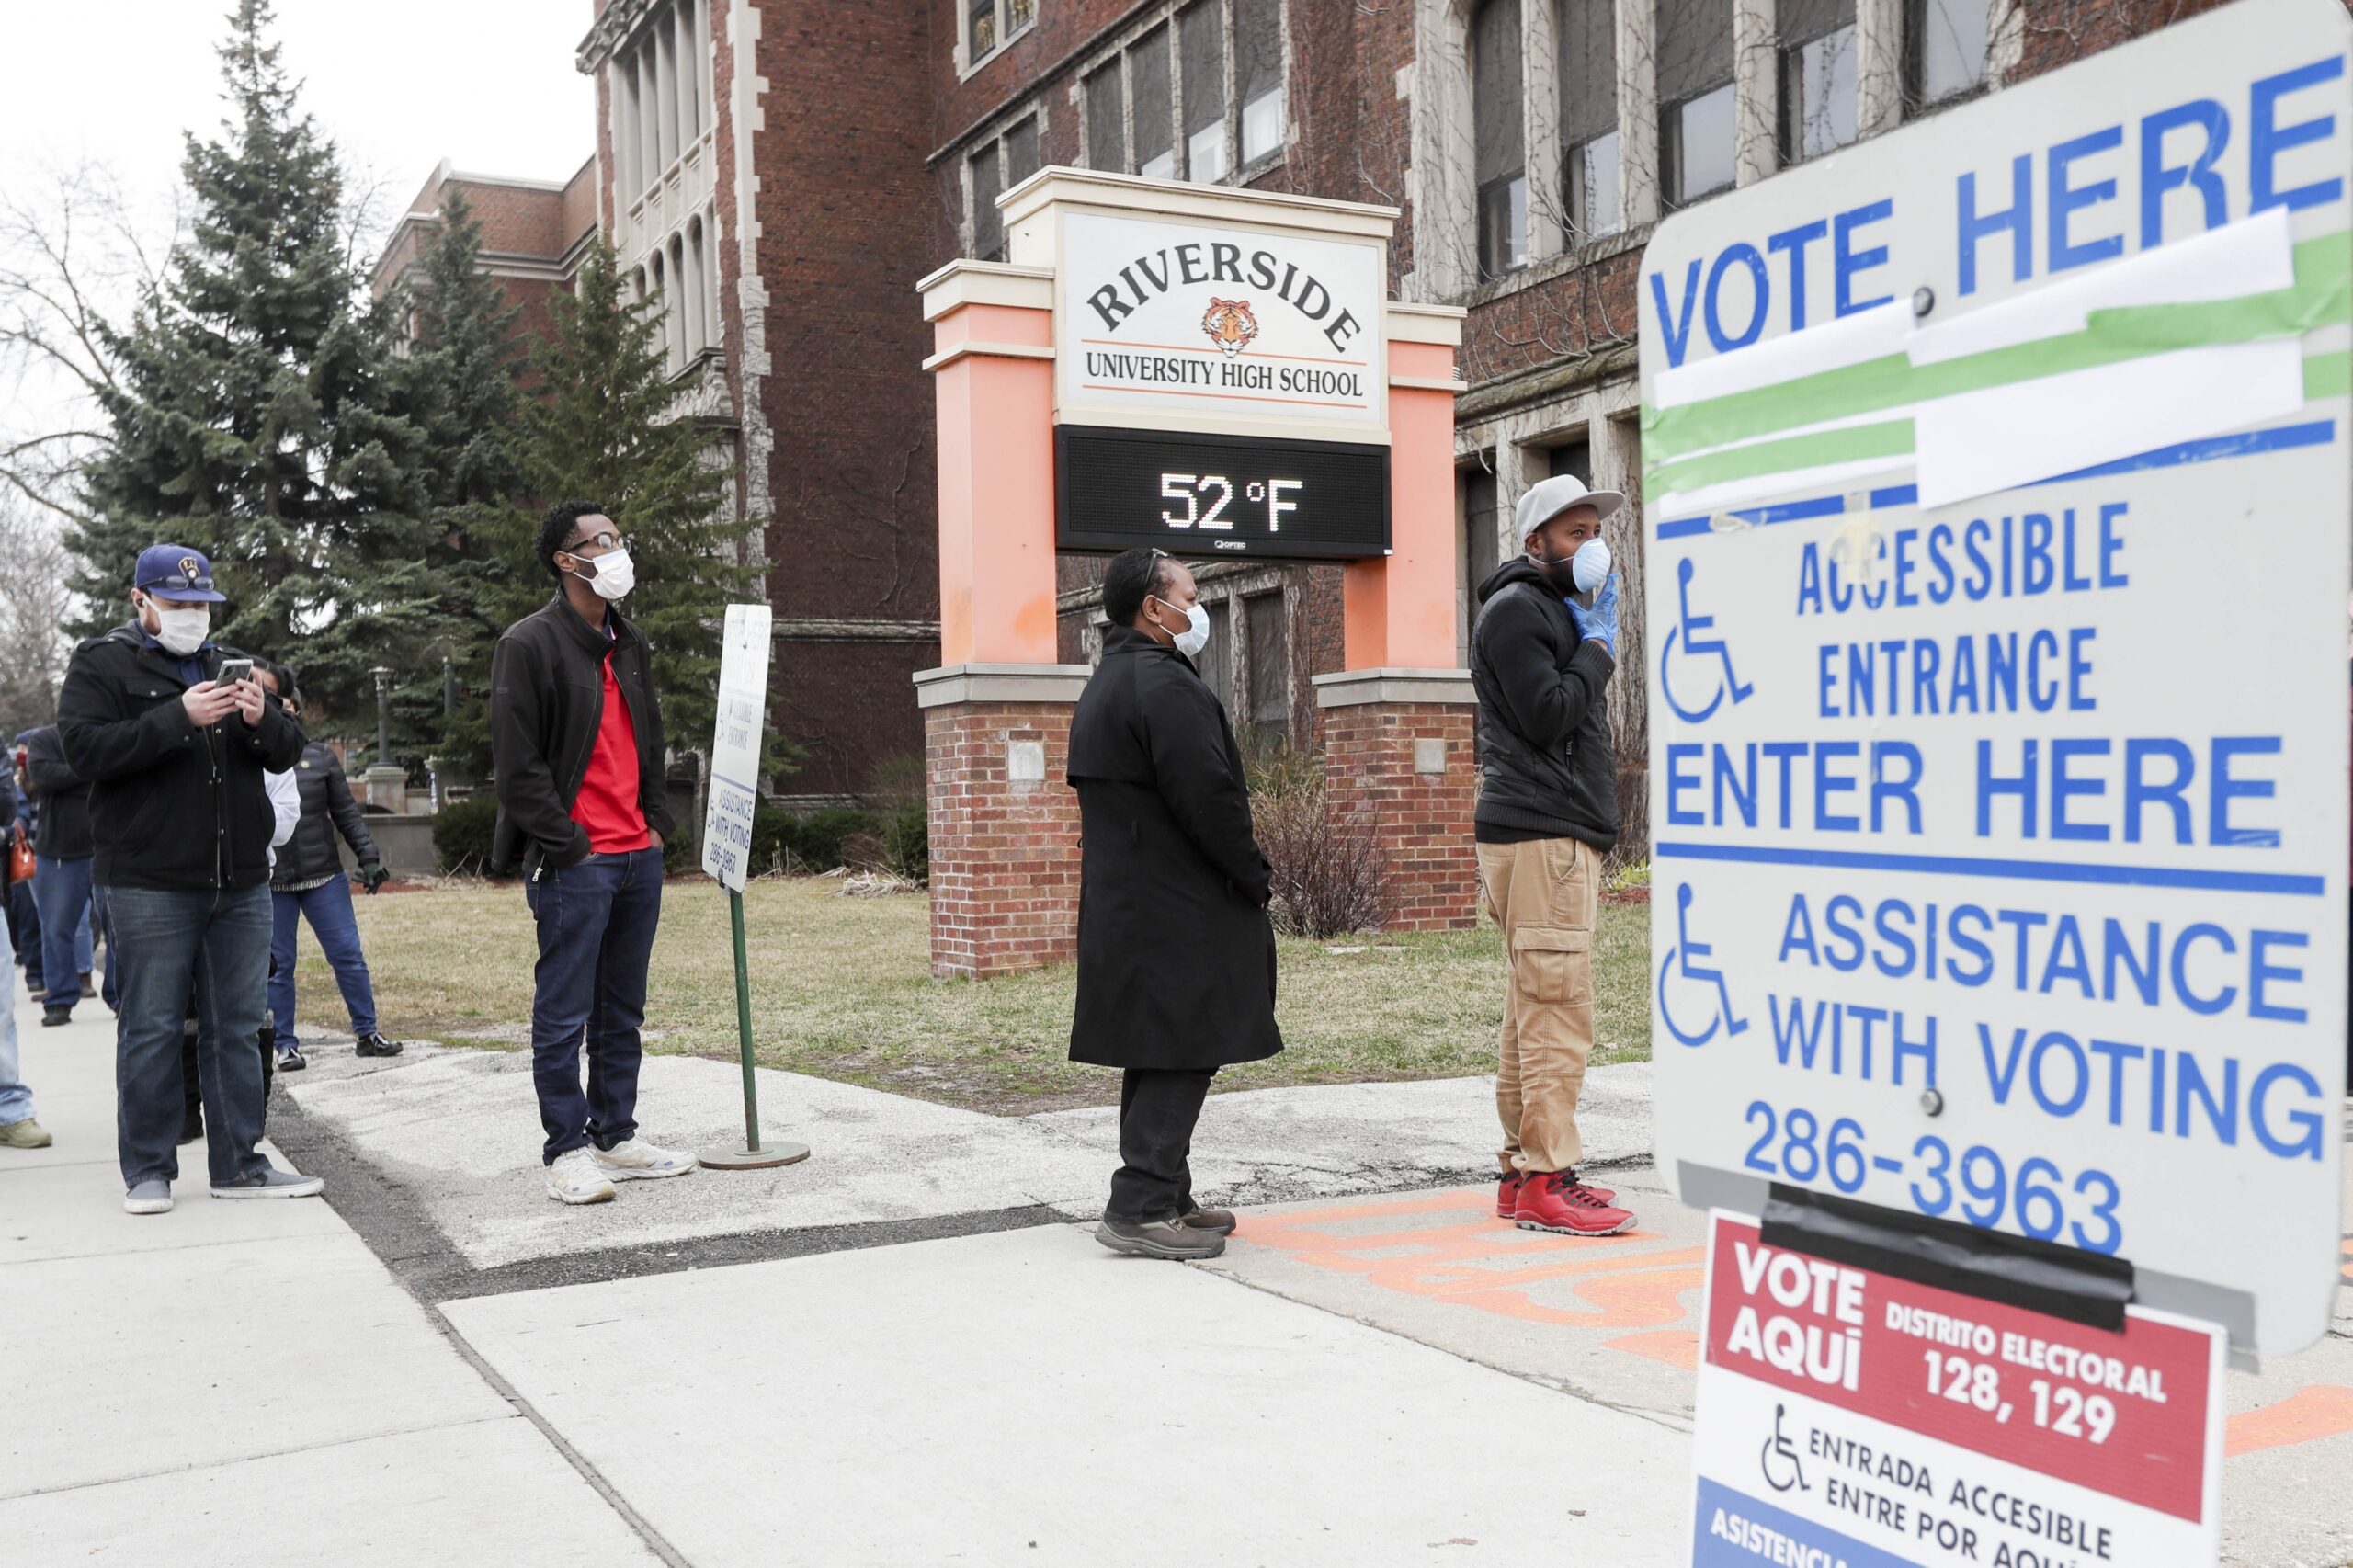 Voters line up at Riverside High School for Wisconsin's primary election